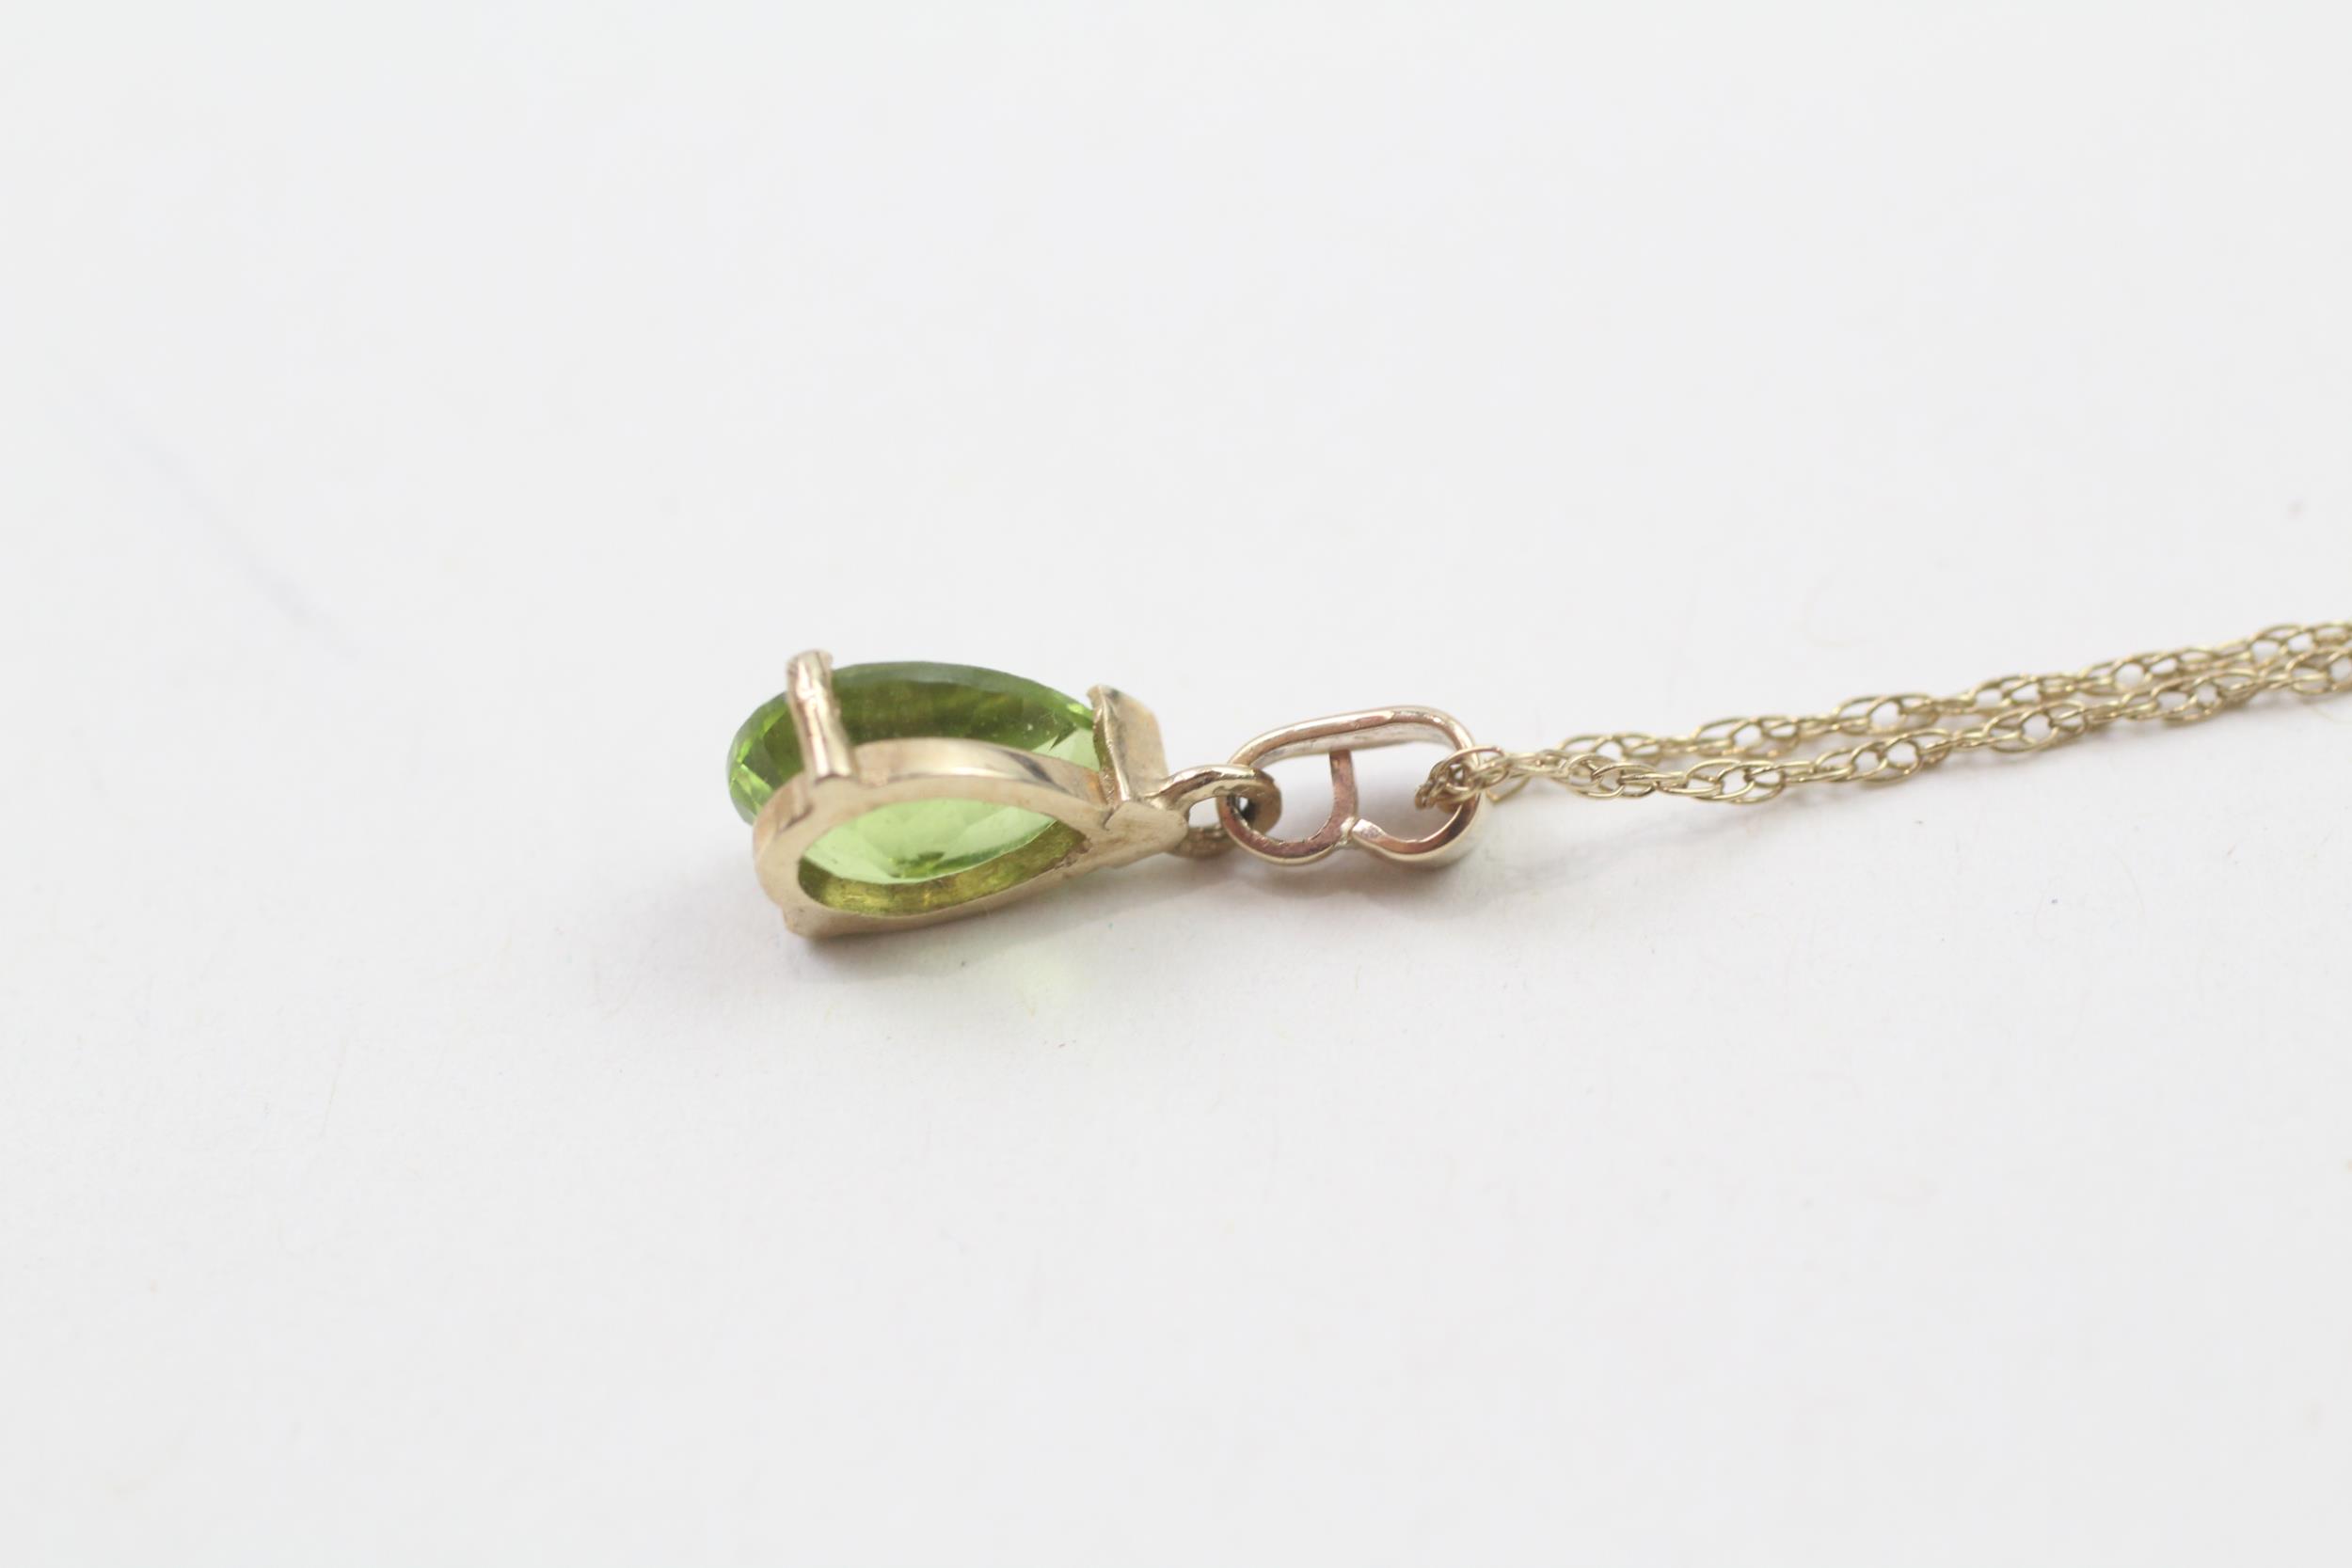 9ct gold pear-cut peridot pendant necklace (1.5g) - Image 3 of 4